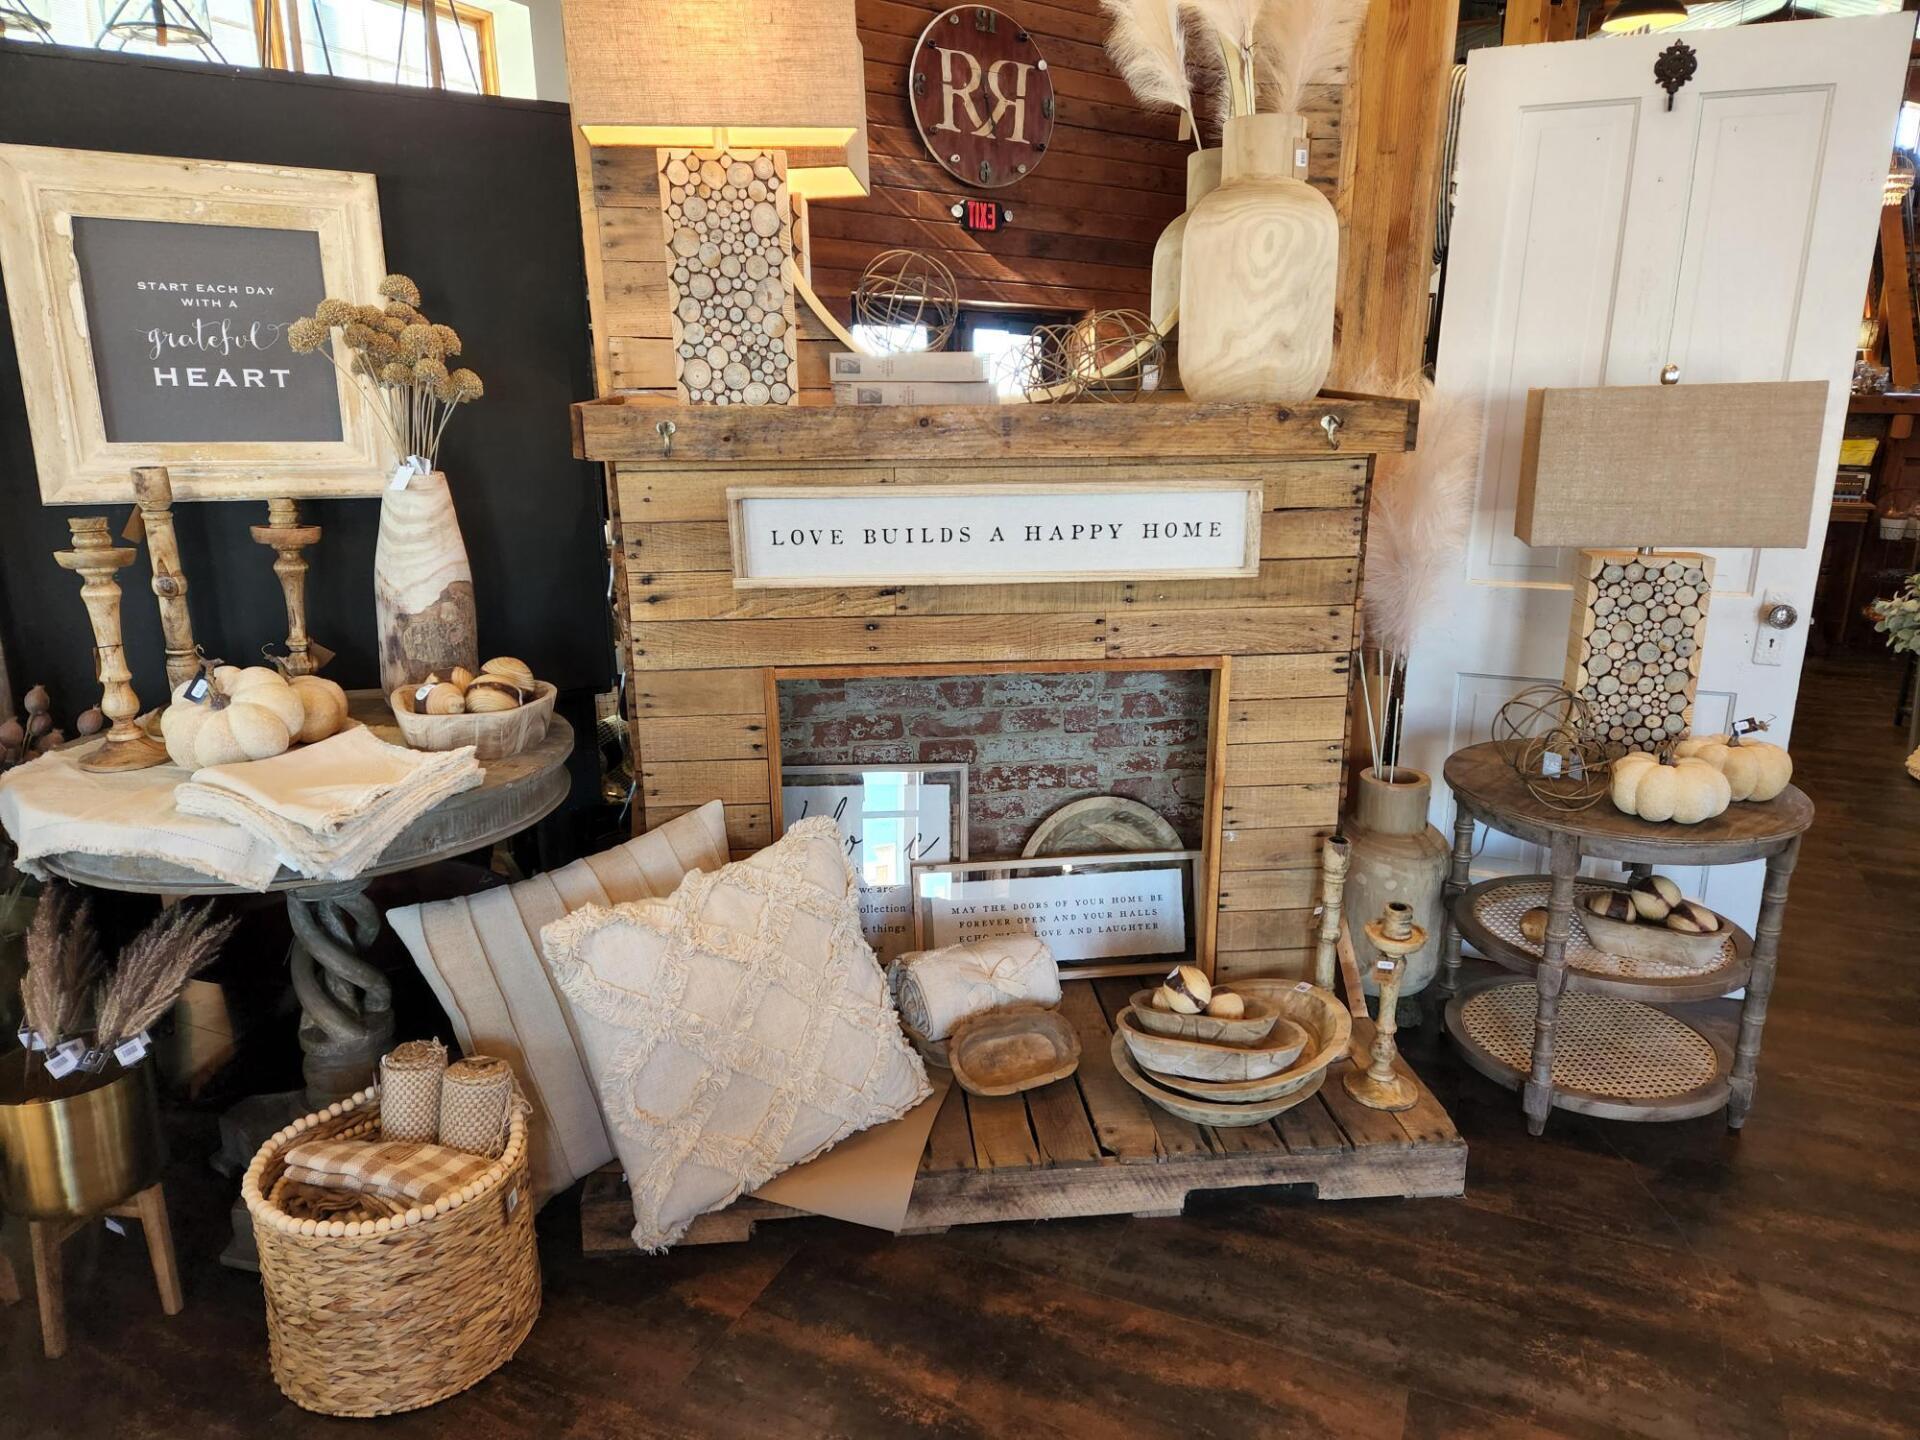 Rustic & Red Cozad (308)784-3200